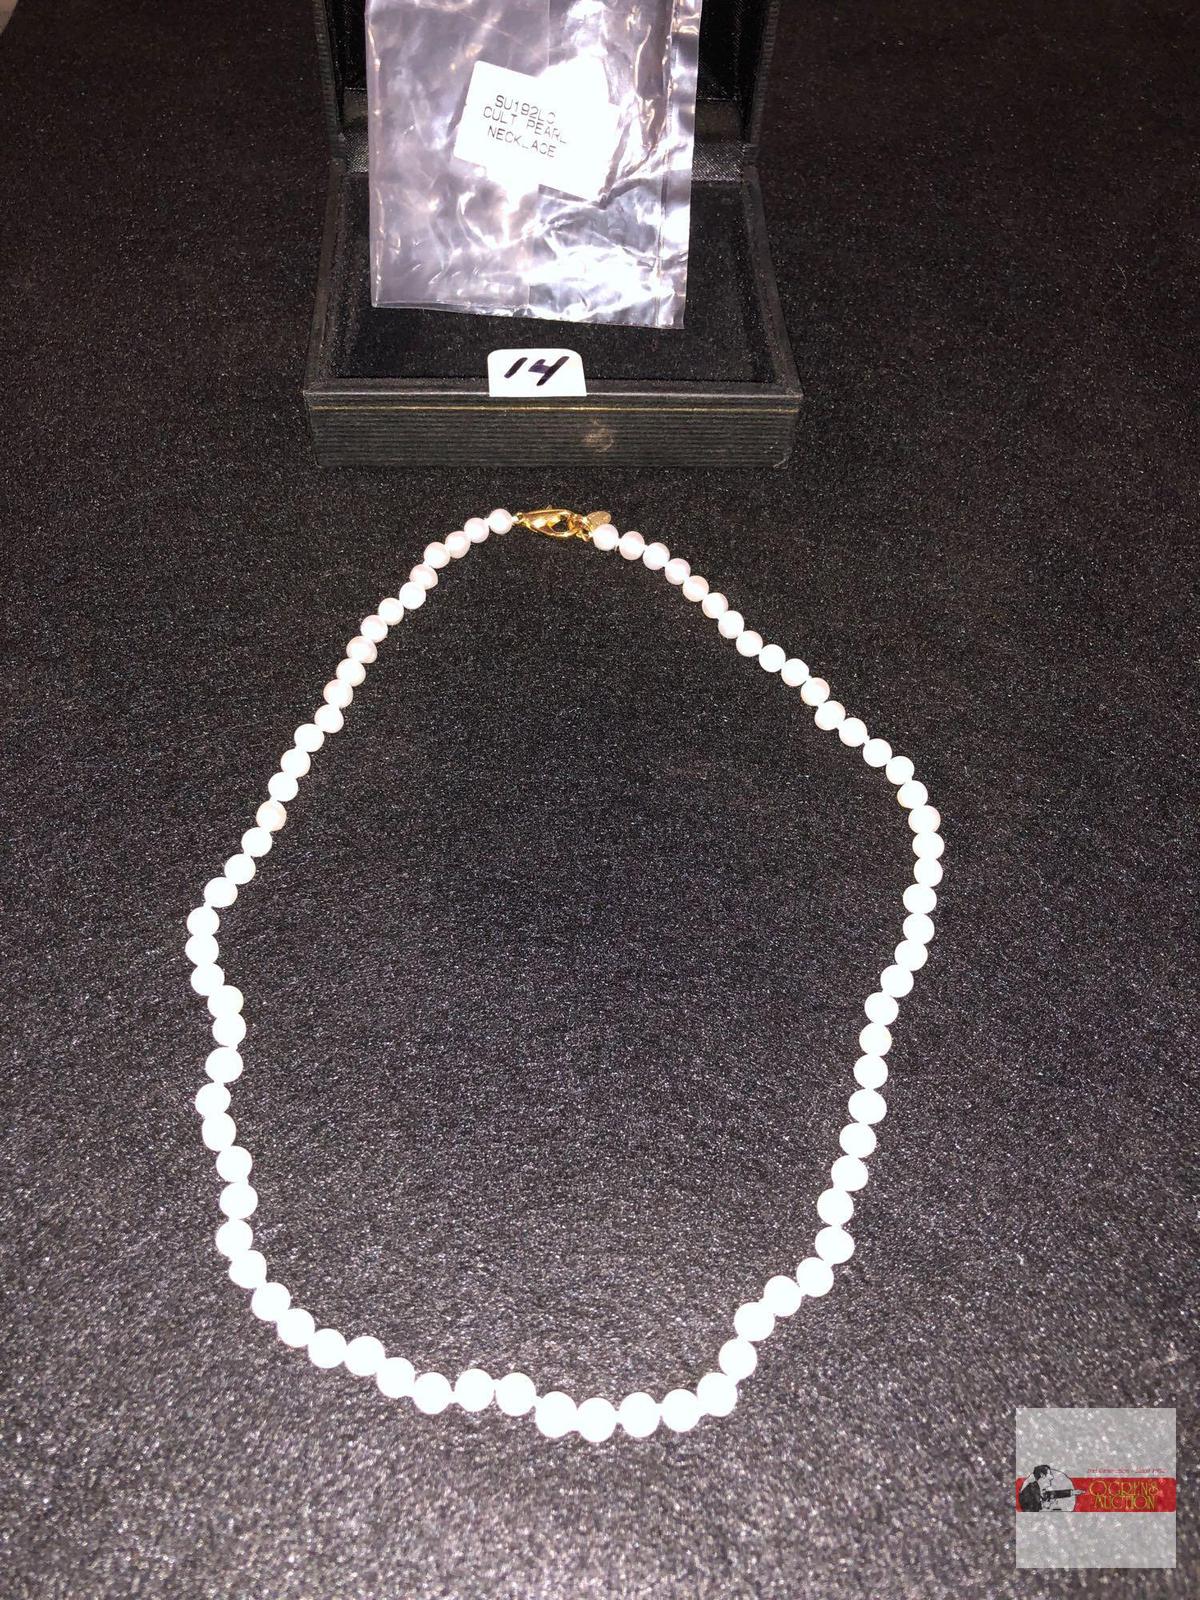 Jewelry - Necklace -JC Lind cult pearls necklace marked 14KGE